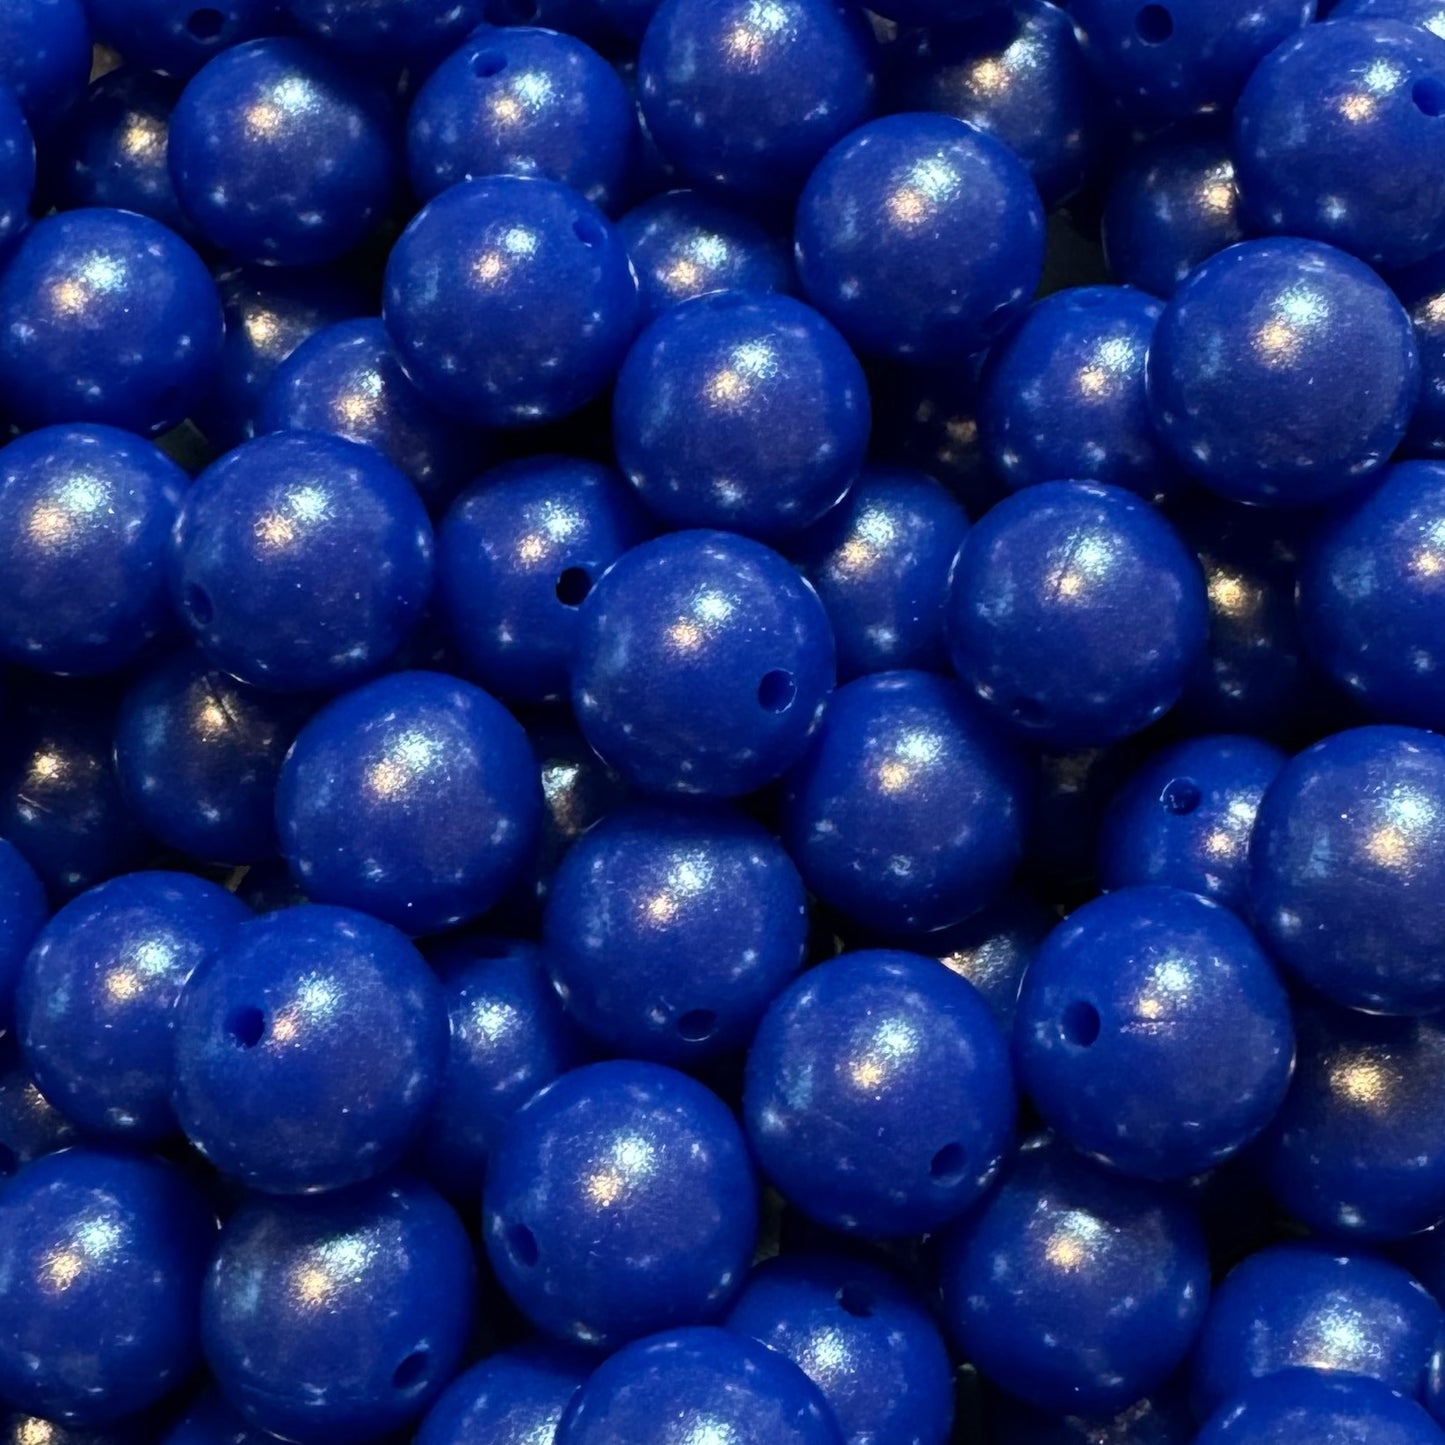 15mm Primary Blue Chameleon Silicone Bead